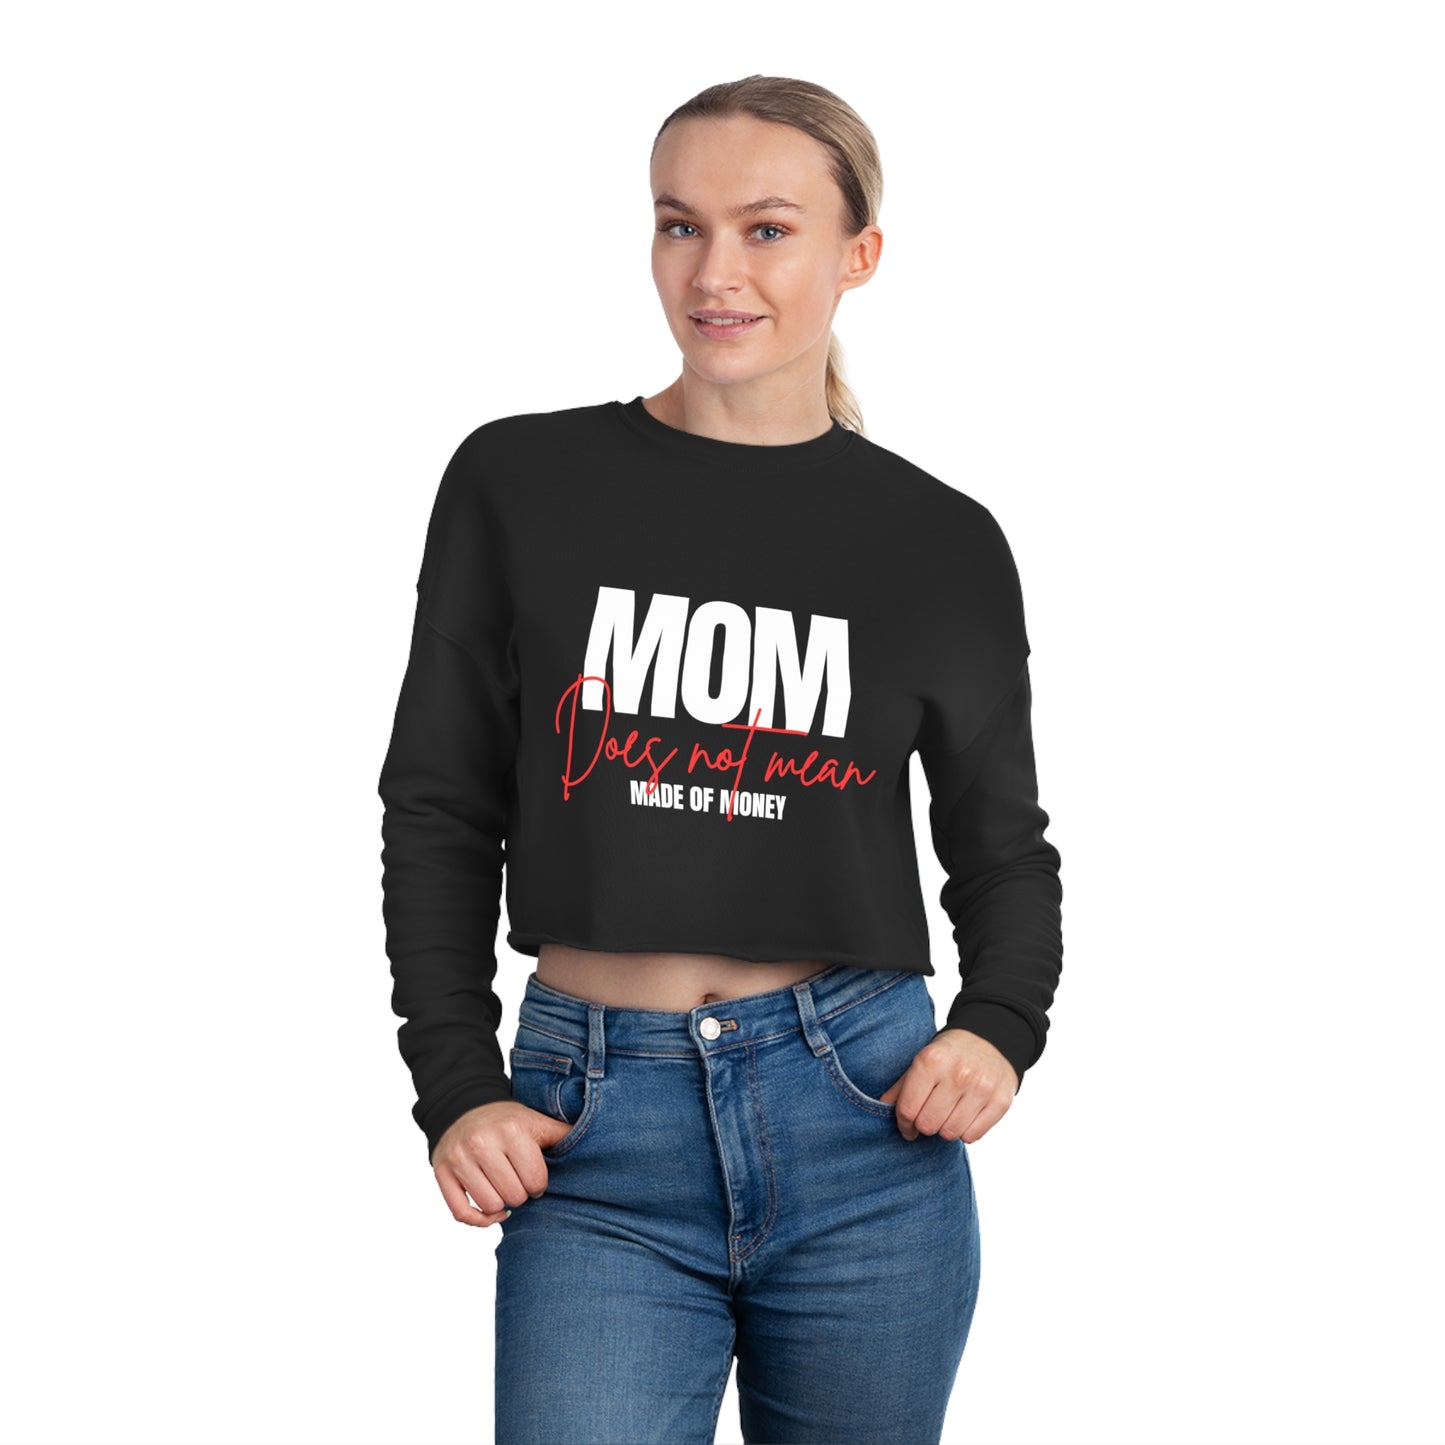 'MOM does not mean Made of Money' Women's Cropped Sweatshirt